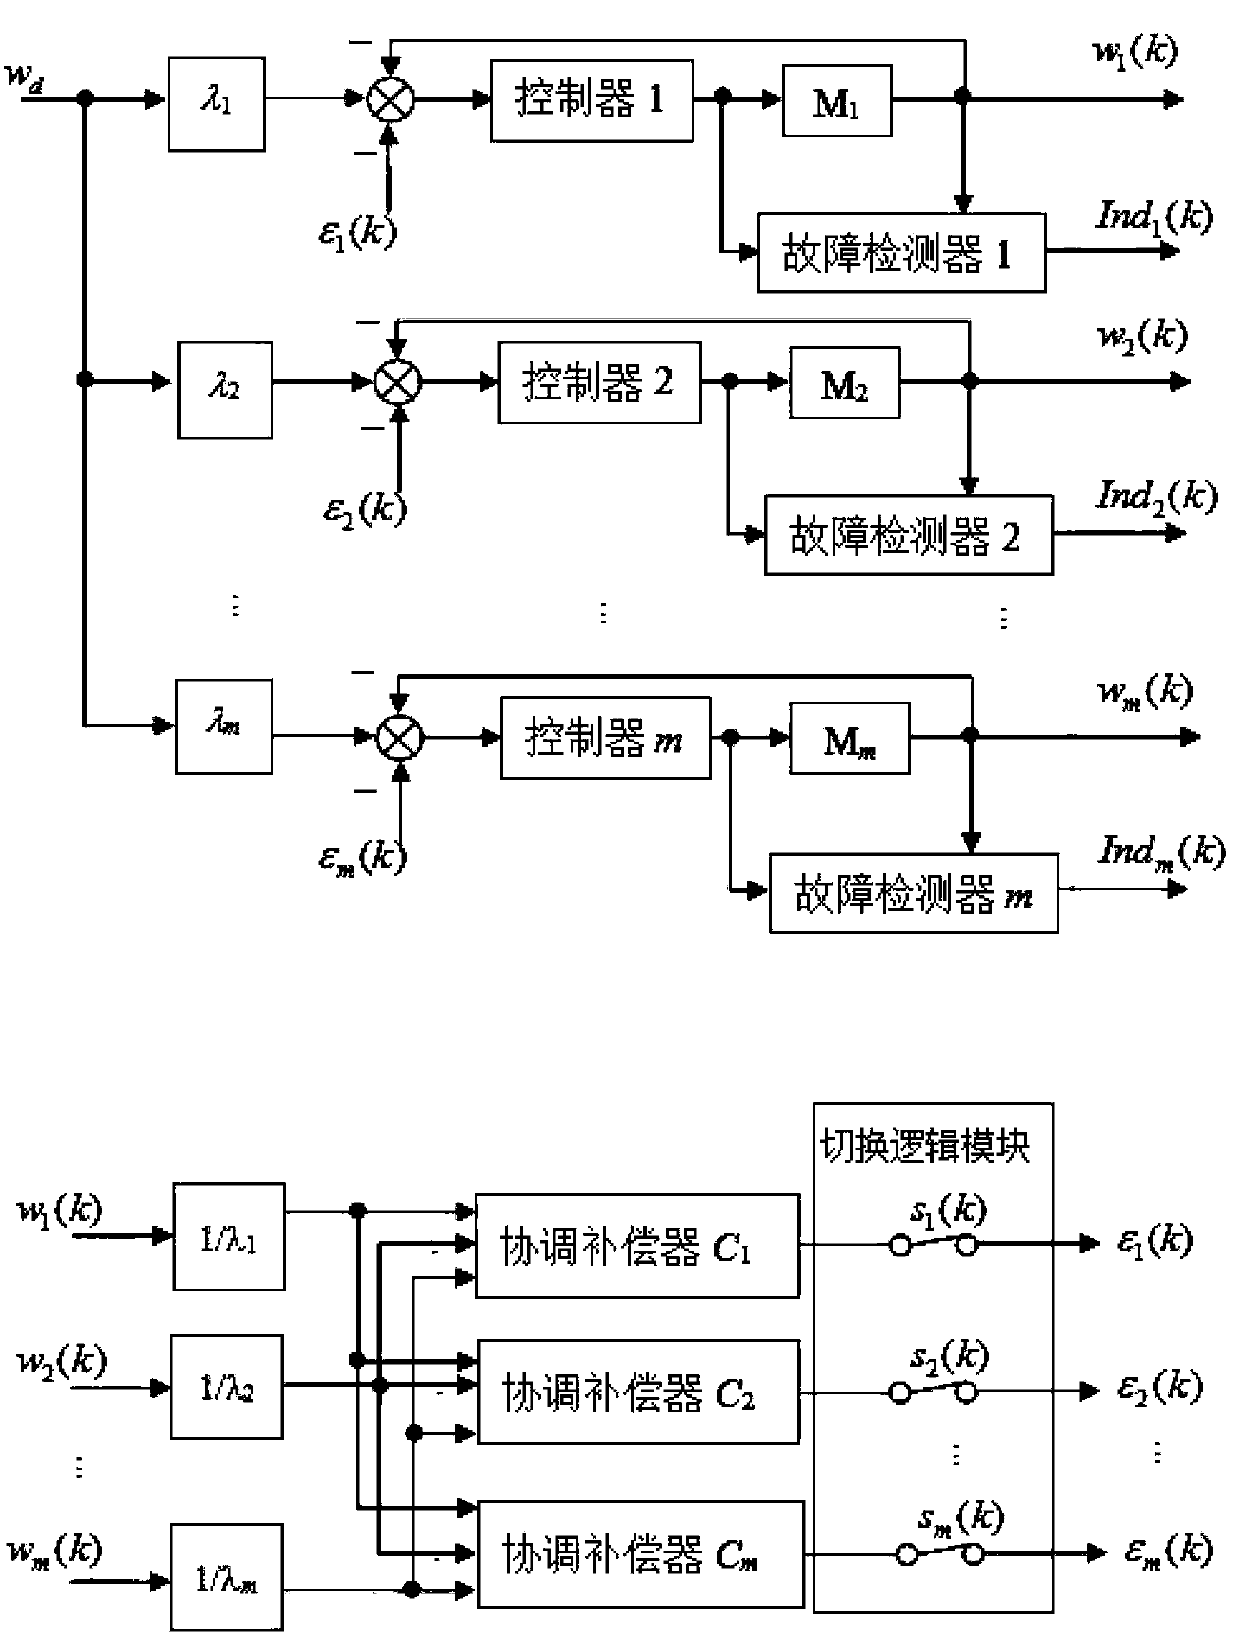 A Fault-Tolerant Proportional Coordinated Control Method for Multi-motor Servo Drive System under Coupling Control Structure